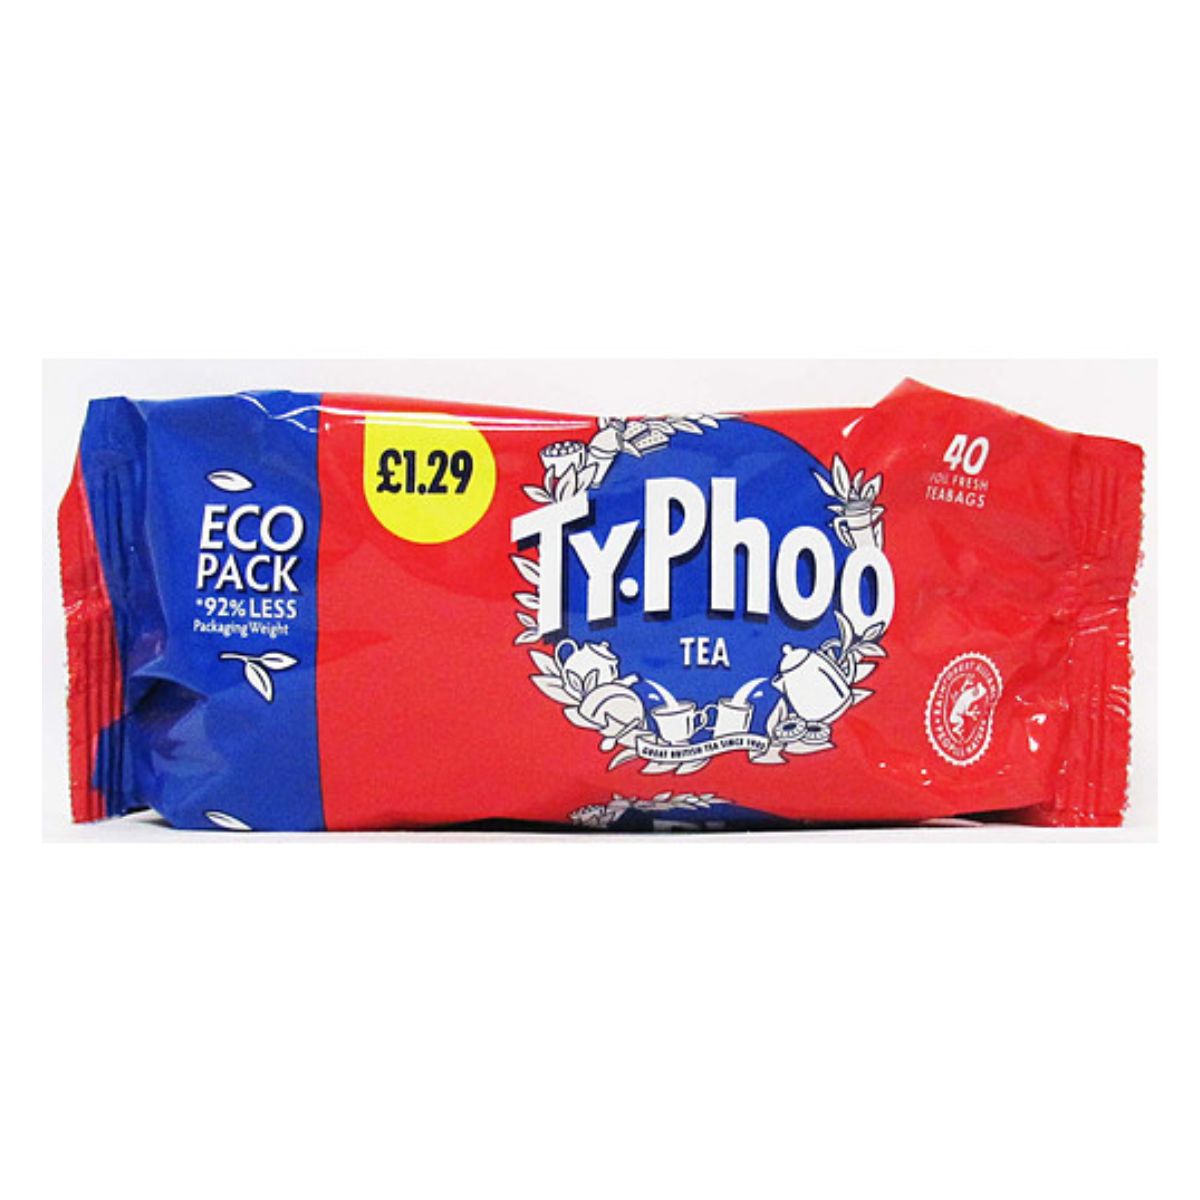 A package of Typhoo - Eco Refil Tea - 40pcs, priced at £1.29. The red and blue packaging highlights "Eco Pack - 92% Less Packaging," making it an eco-friendly option for sustainable tea lovers.